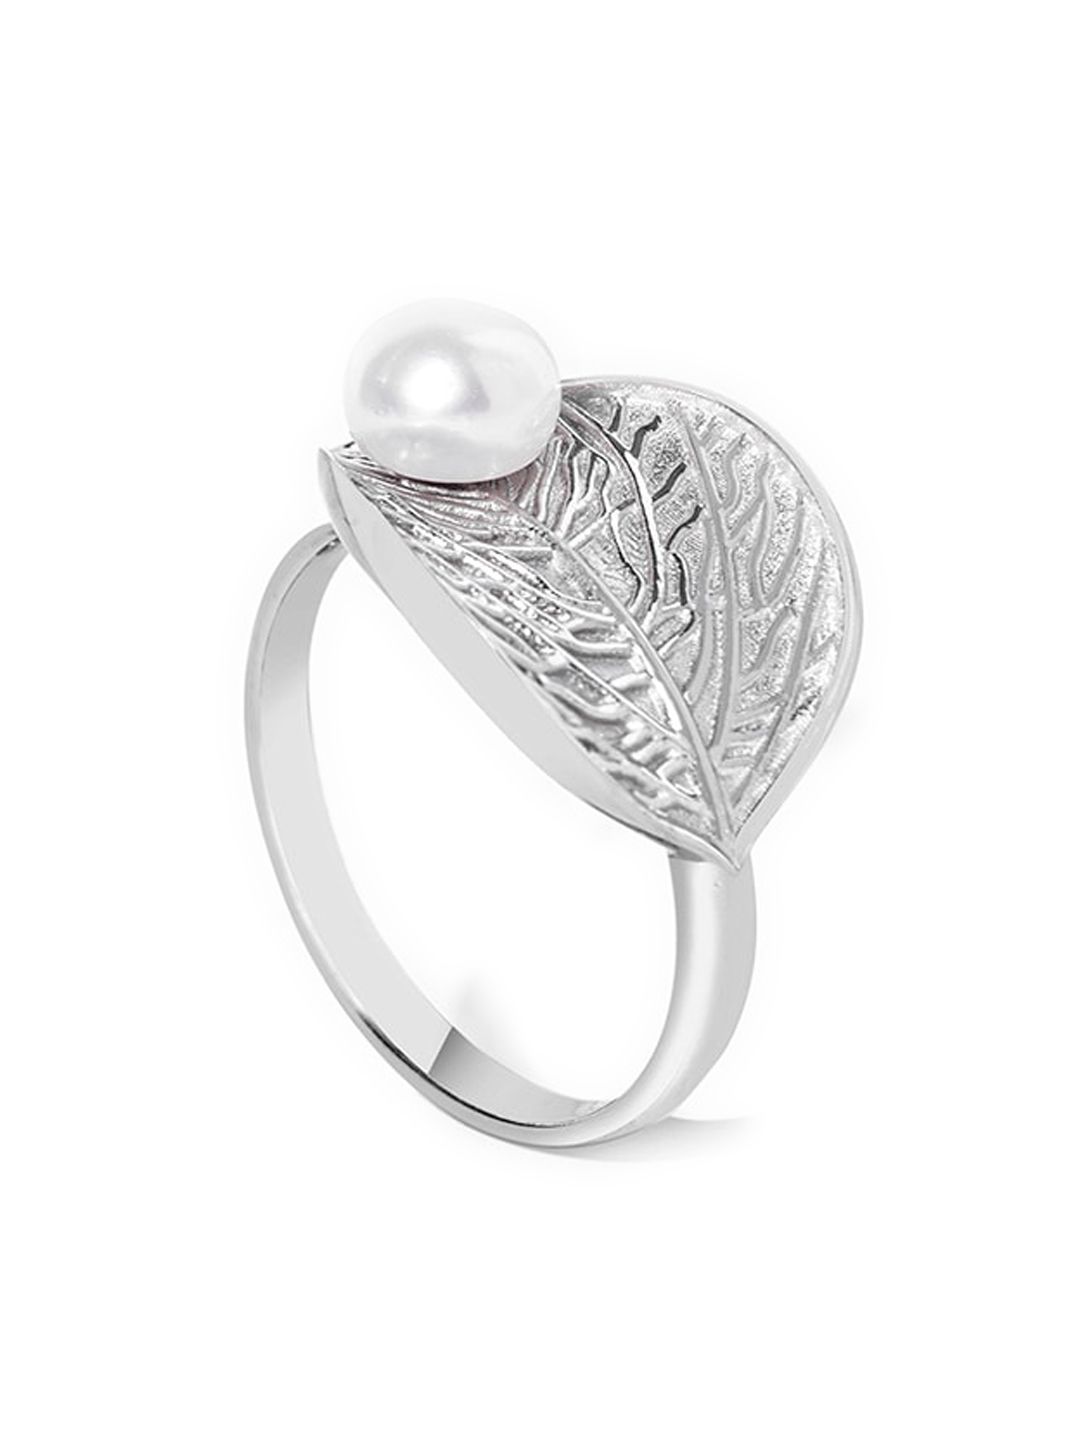 Mikoto by FableStreet Sterling Silver Rhodium-Plated White Pearl Beaded Finger Ring Price in India